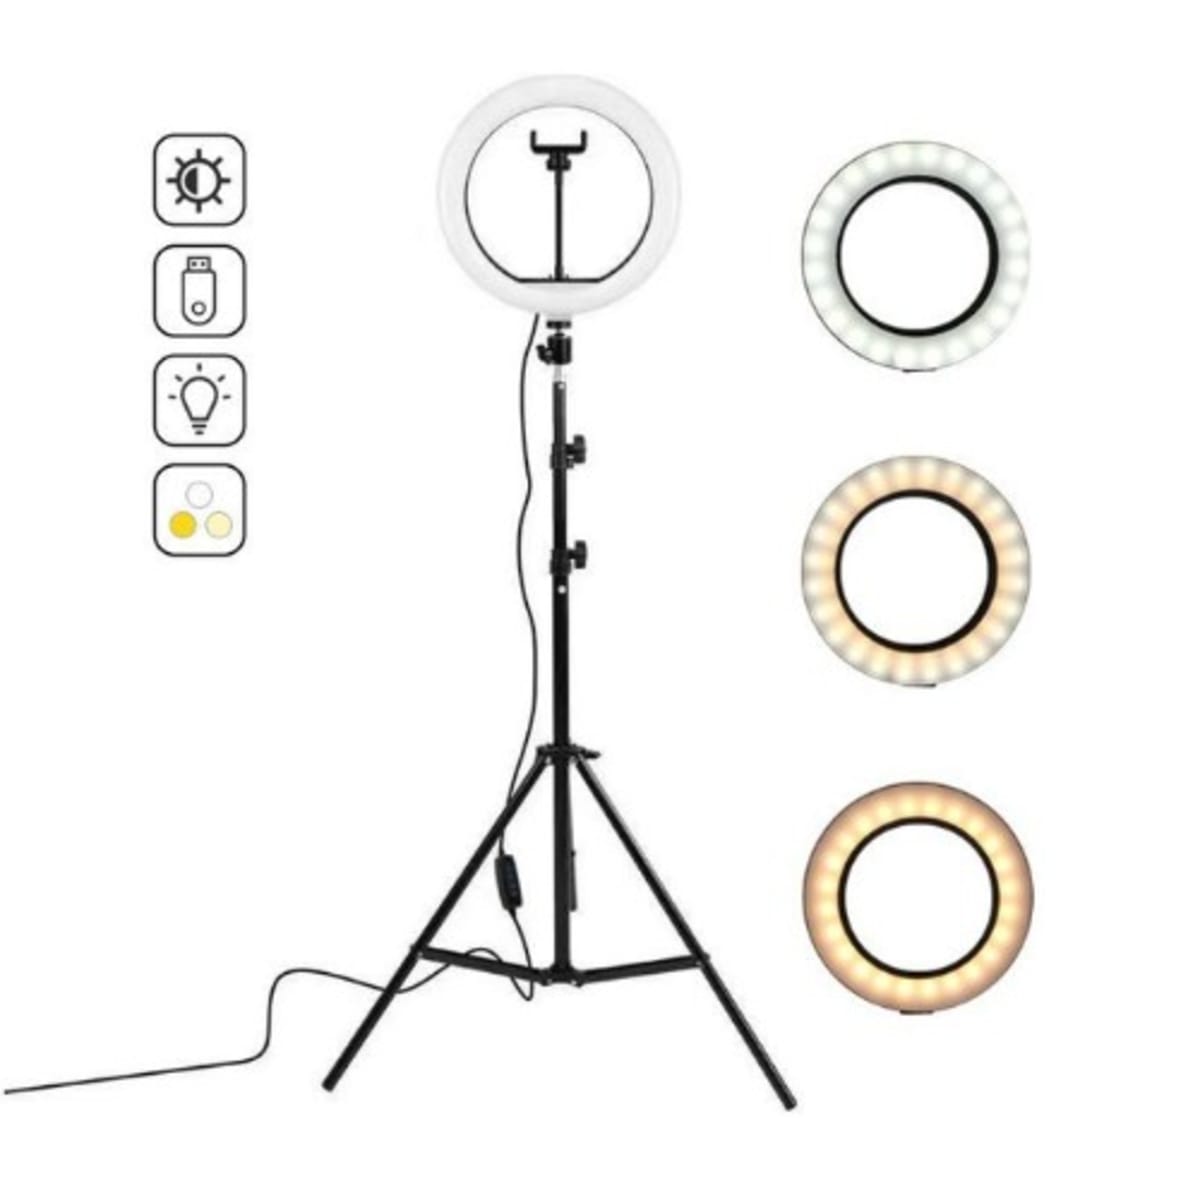 LED Ring Light With Stand For Live Streaming -10 - 26cm